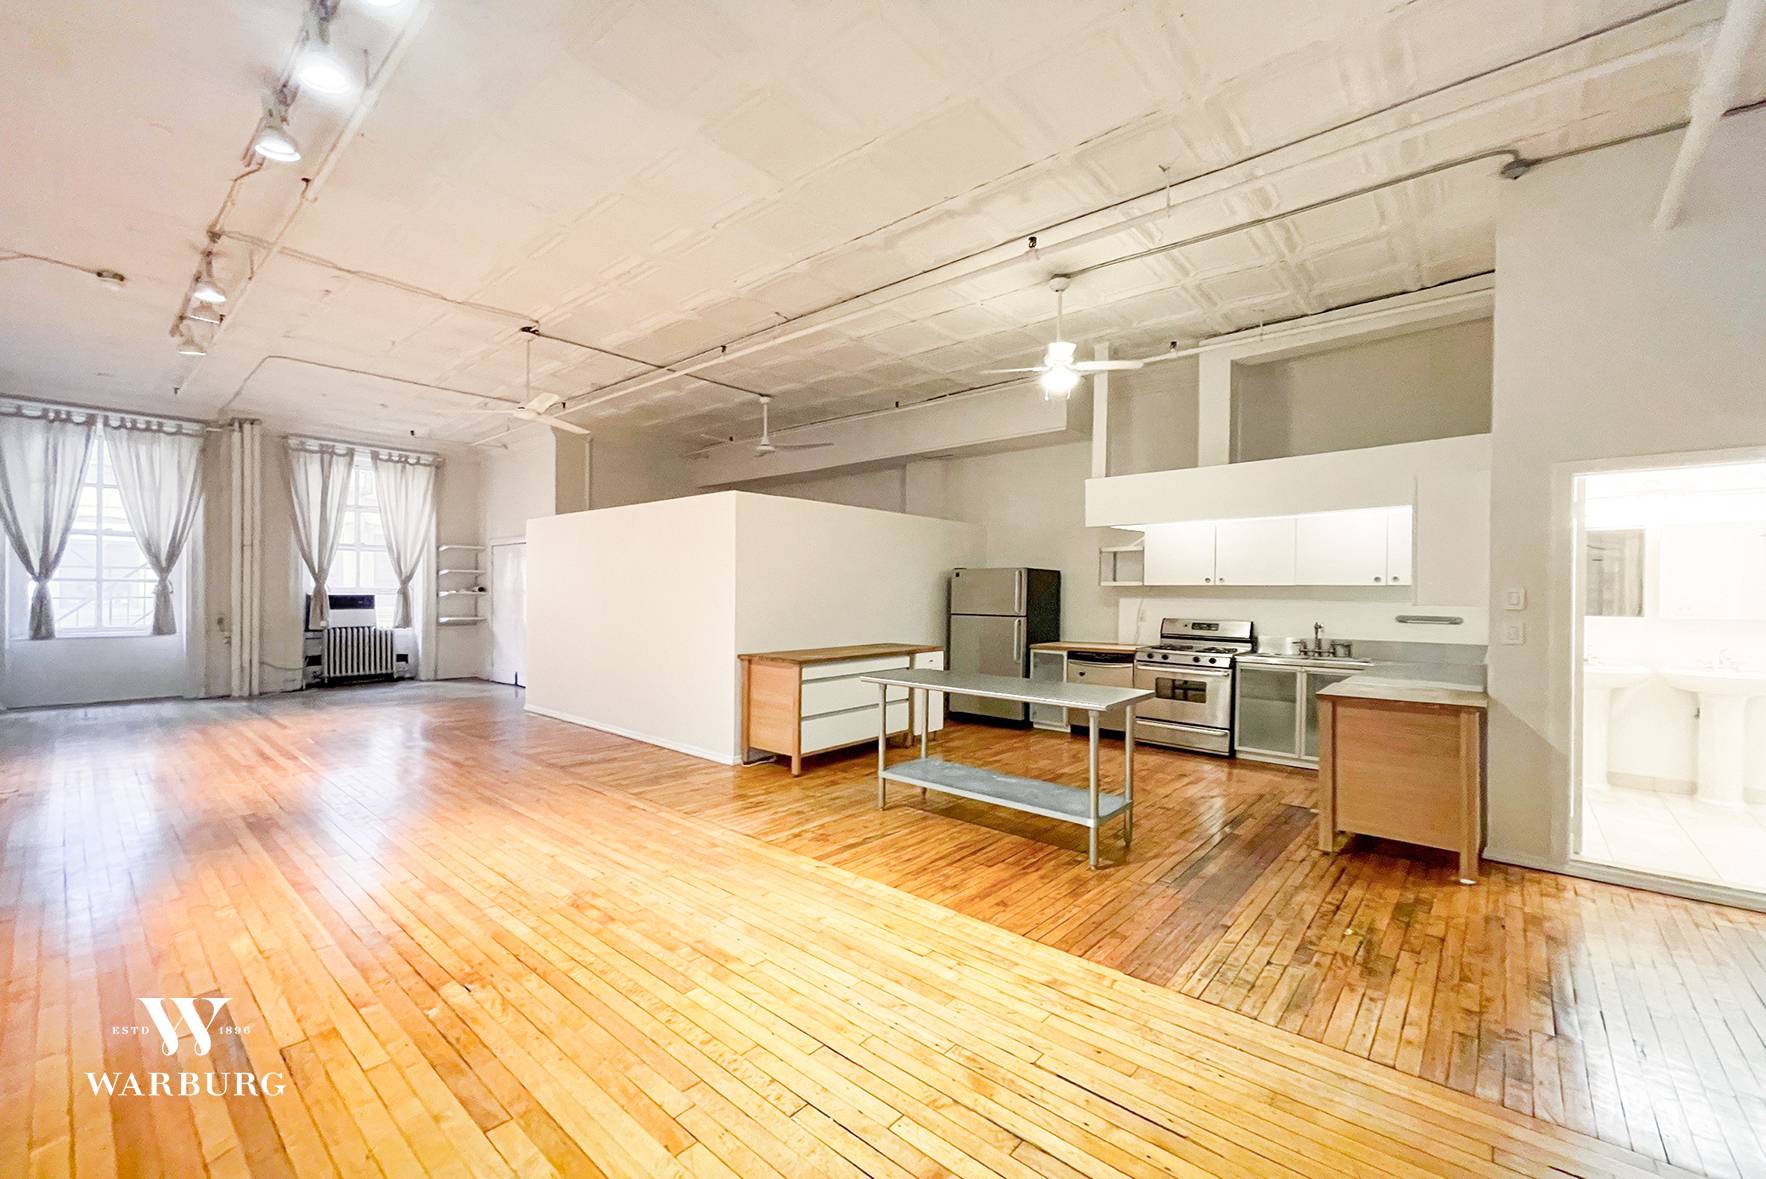 Spacious loft with home office in Prime Tribeca ;, 12 foot, high ceilings ; modern, open kitchen with dishwasher ; spacious bathroom ; wood floors, large windows with southern exposure ...